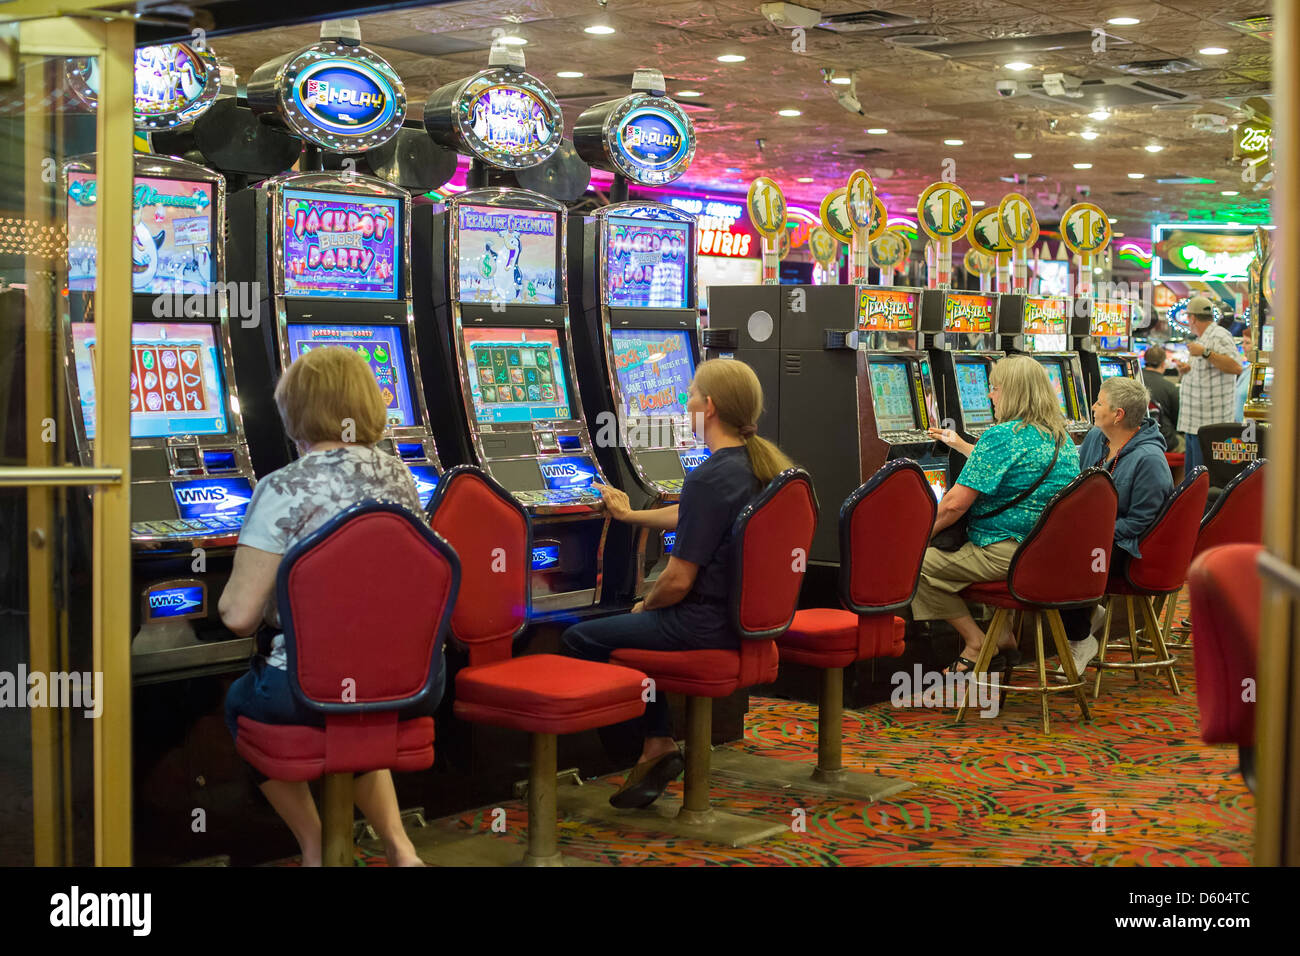 Las Vegas, NV, USA - 13th July 2013: People Playing Slot Machine Games  Inside Las Vegas Casino. Stock Photo, Picture and Royalty Free Image. Image  26254649.